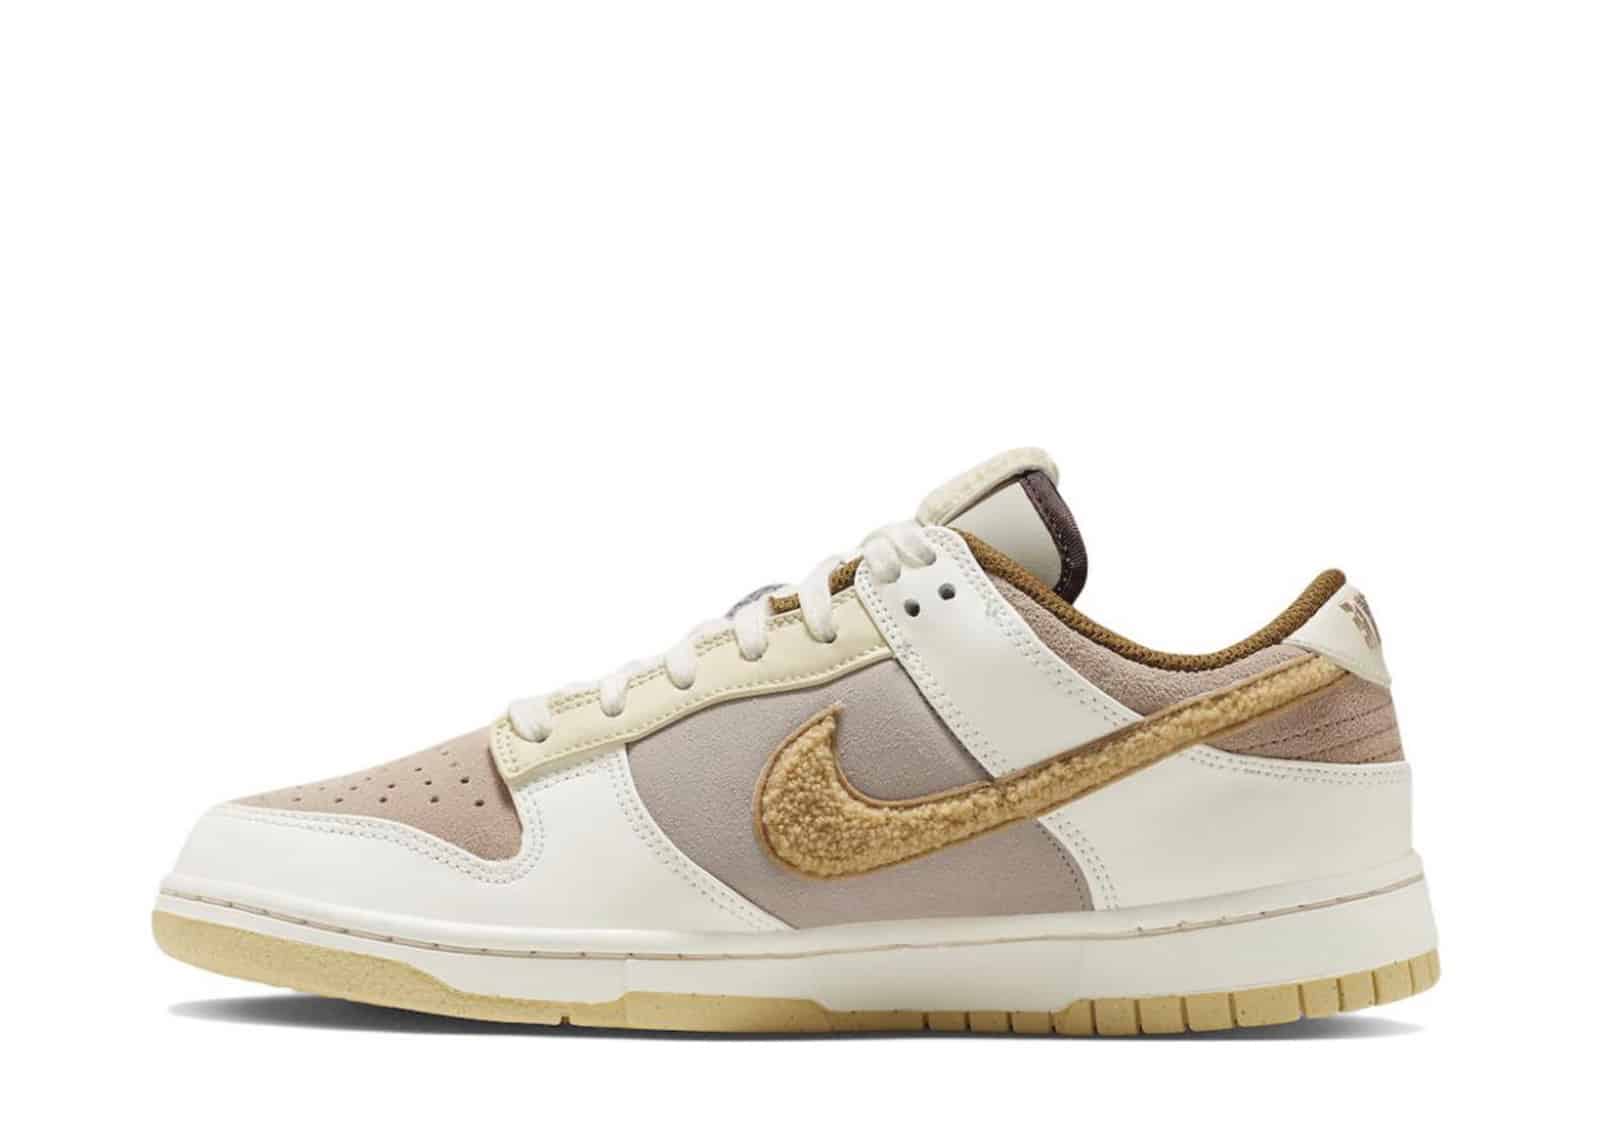 Nike Dunk Low Year Of The Rabbit “Fossil Stone”